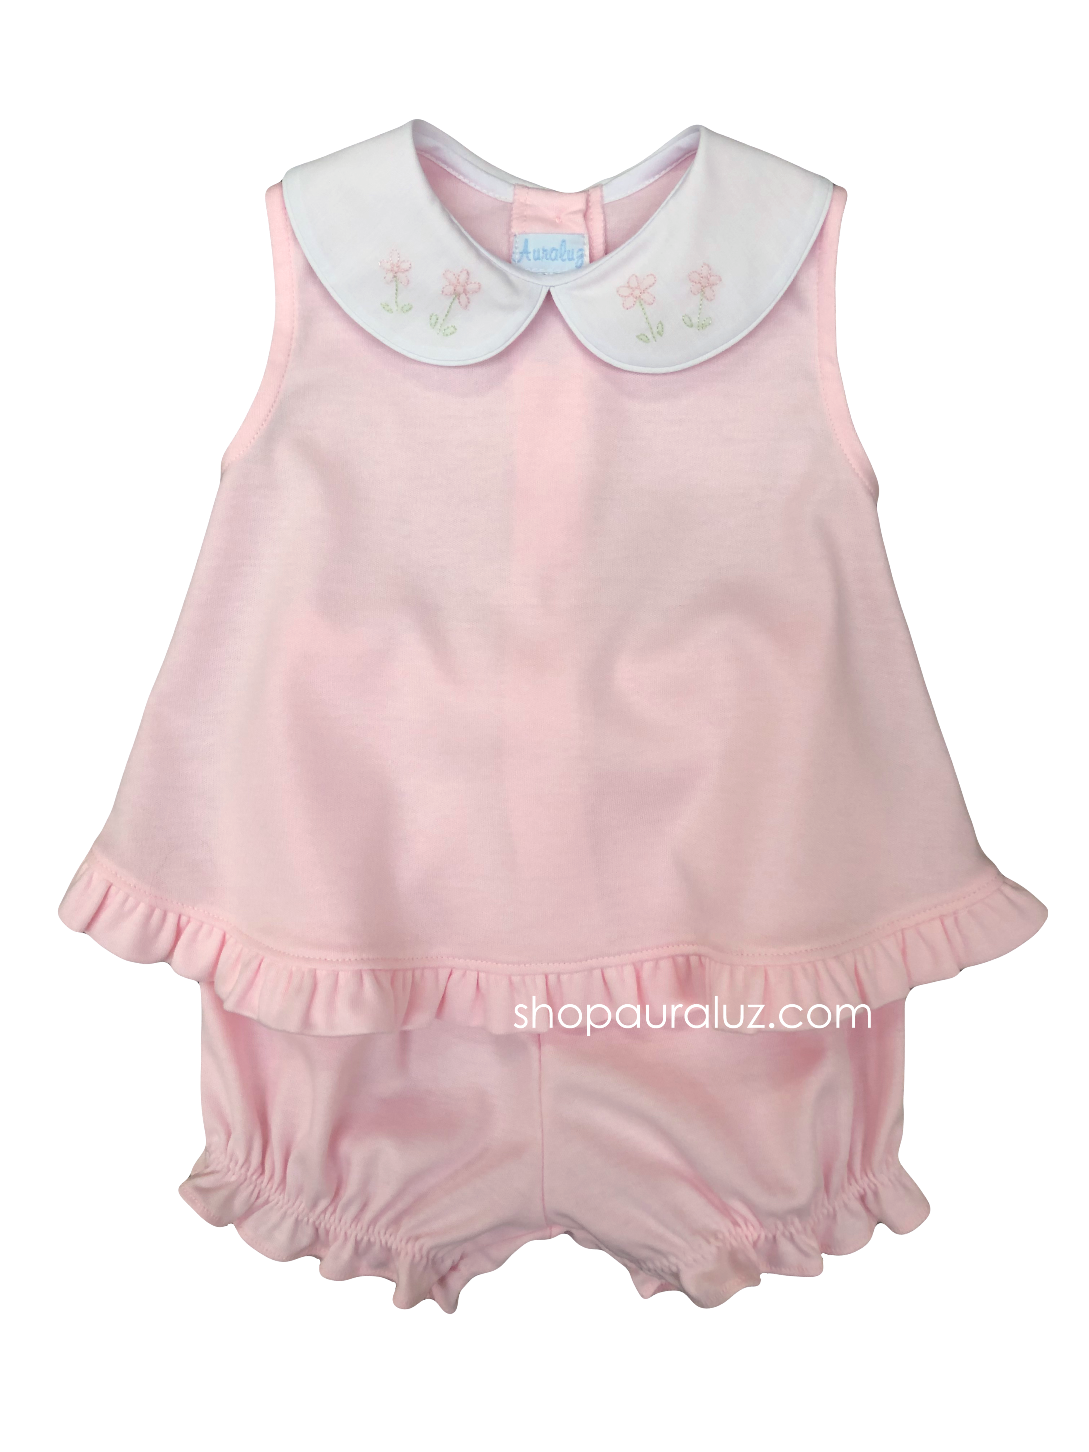 Auraluz Girl Sleeveless 2pc Knit Set...Pink with white p.p. collar and embroidered flowers